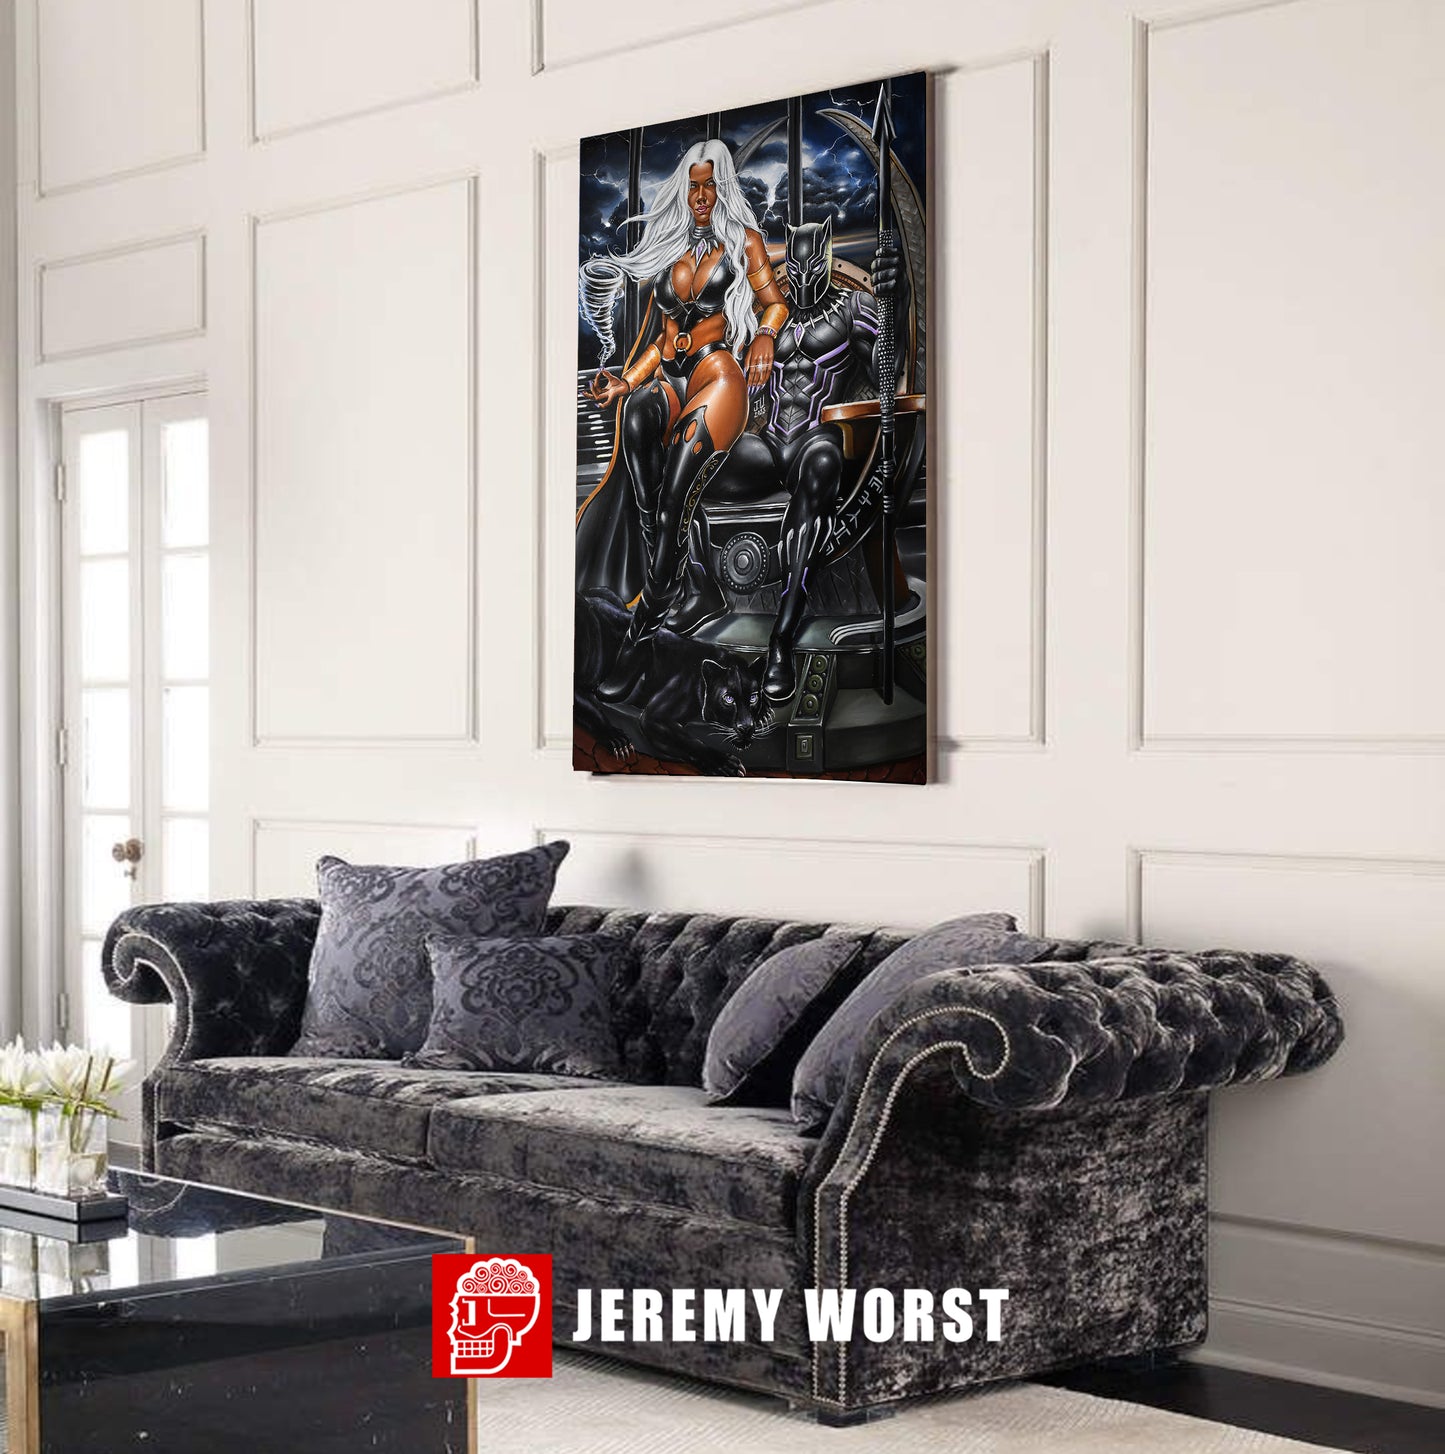 JEREMY WORST The King and I Wall Fan Art Storm Black Panther